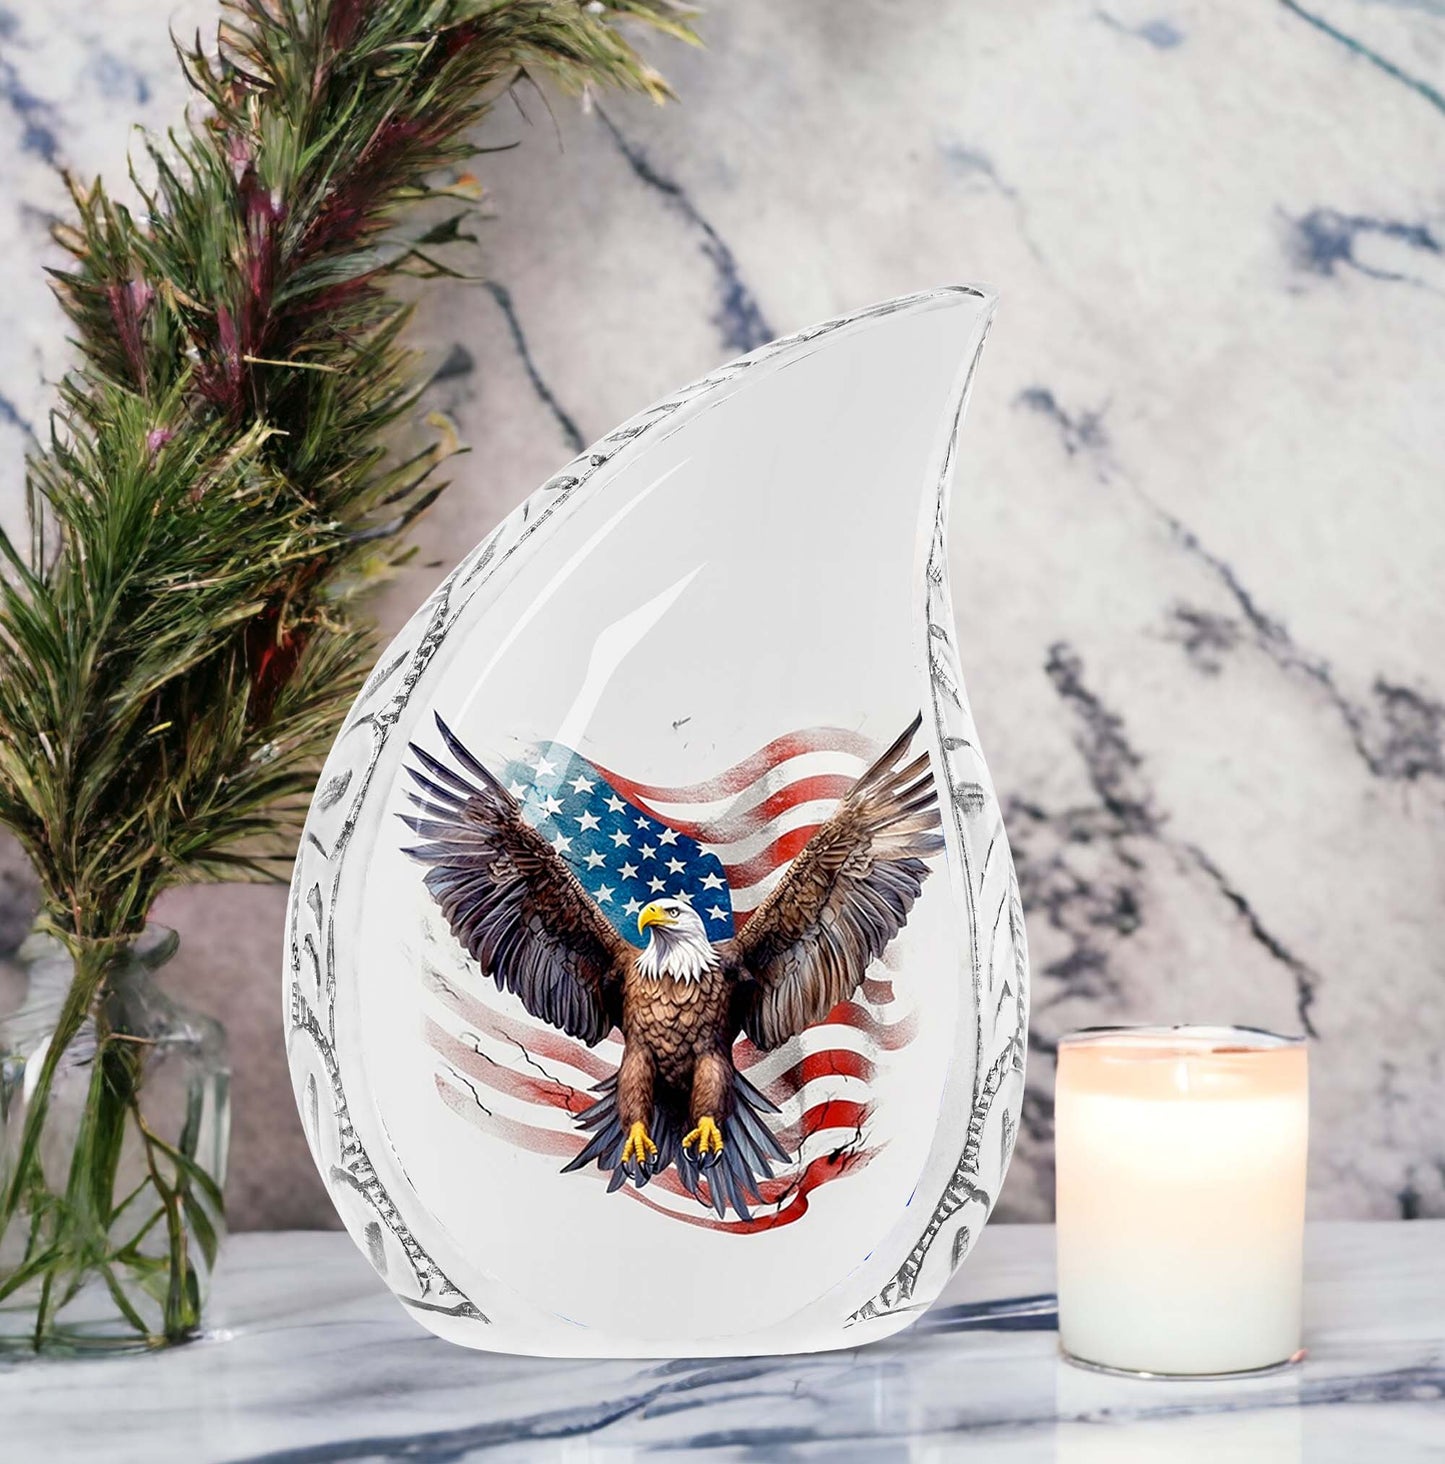 Elegant American flag-themed cremation urn featuring an eagle, suitable for adults' ashes